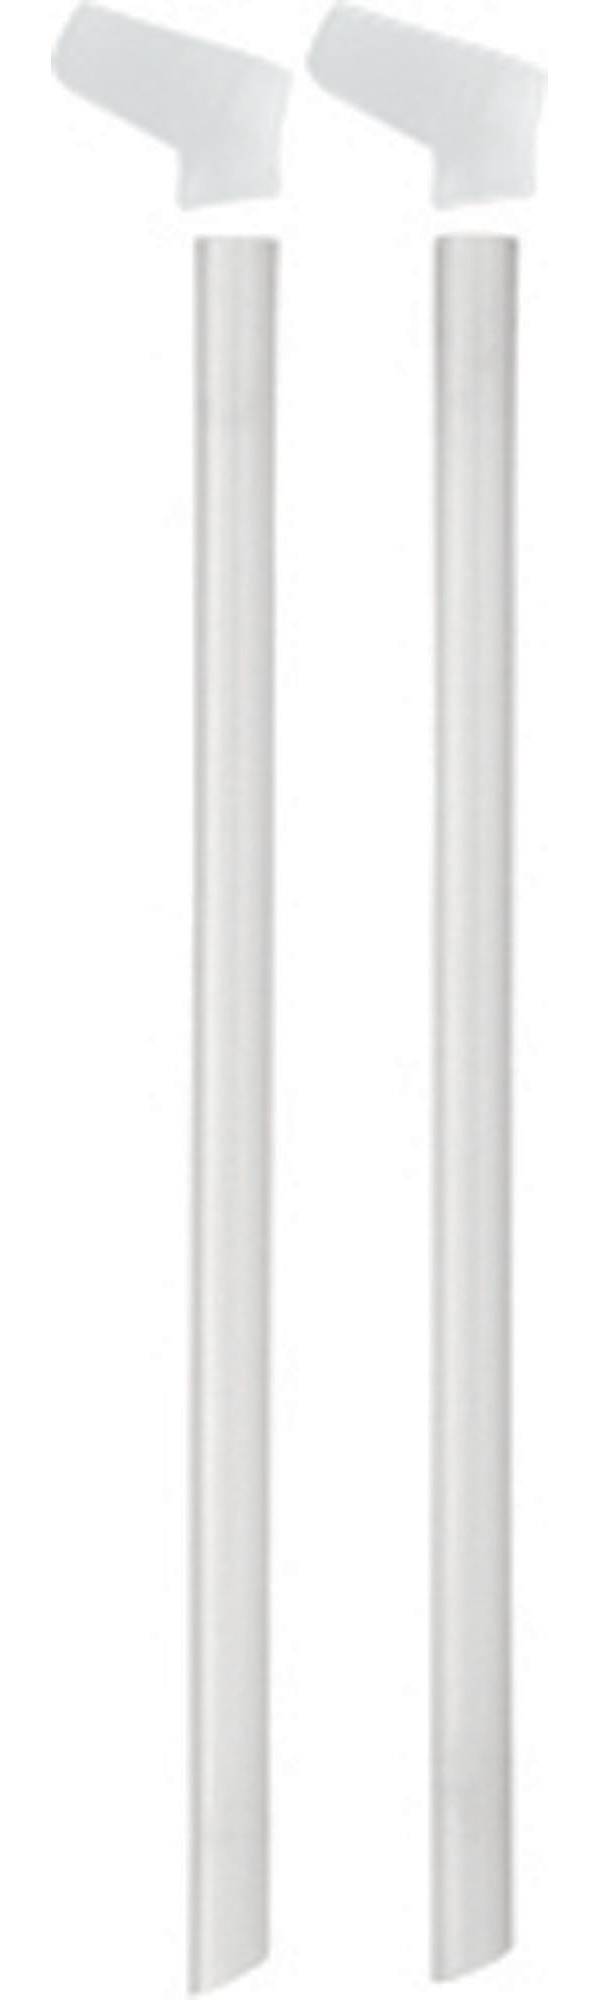 Camelbak Eddy+ Replacement Bite Valve and Straw product image